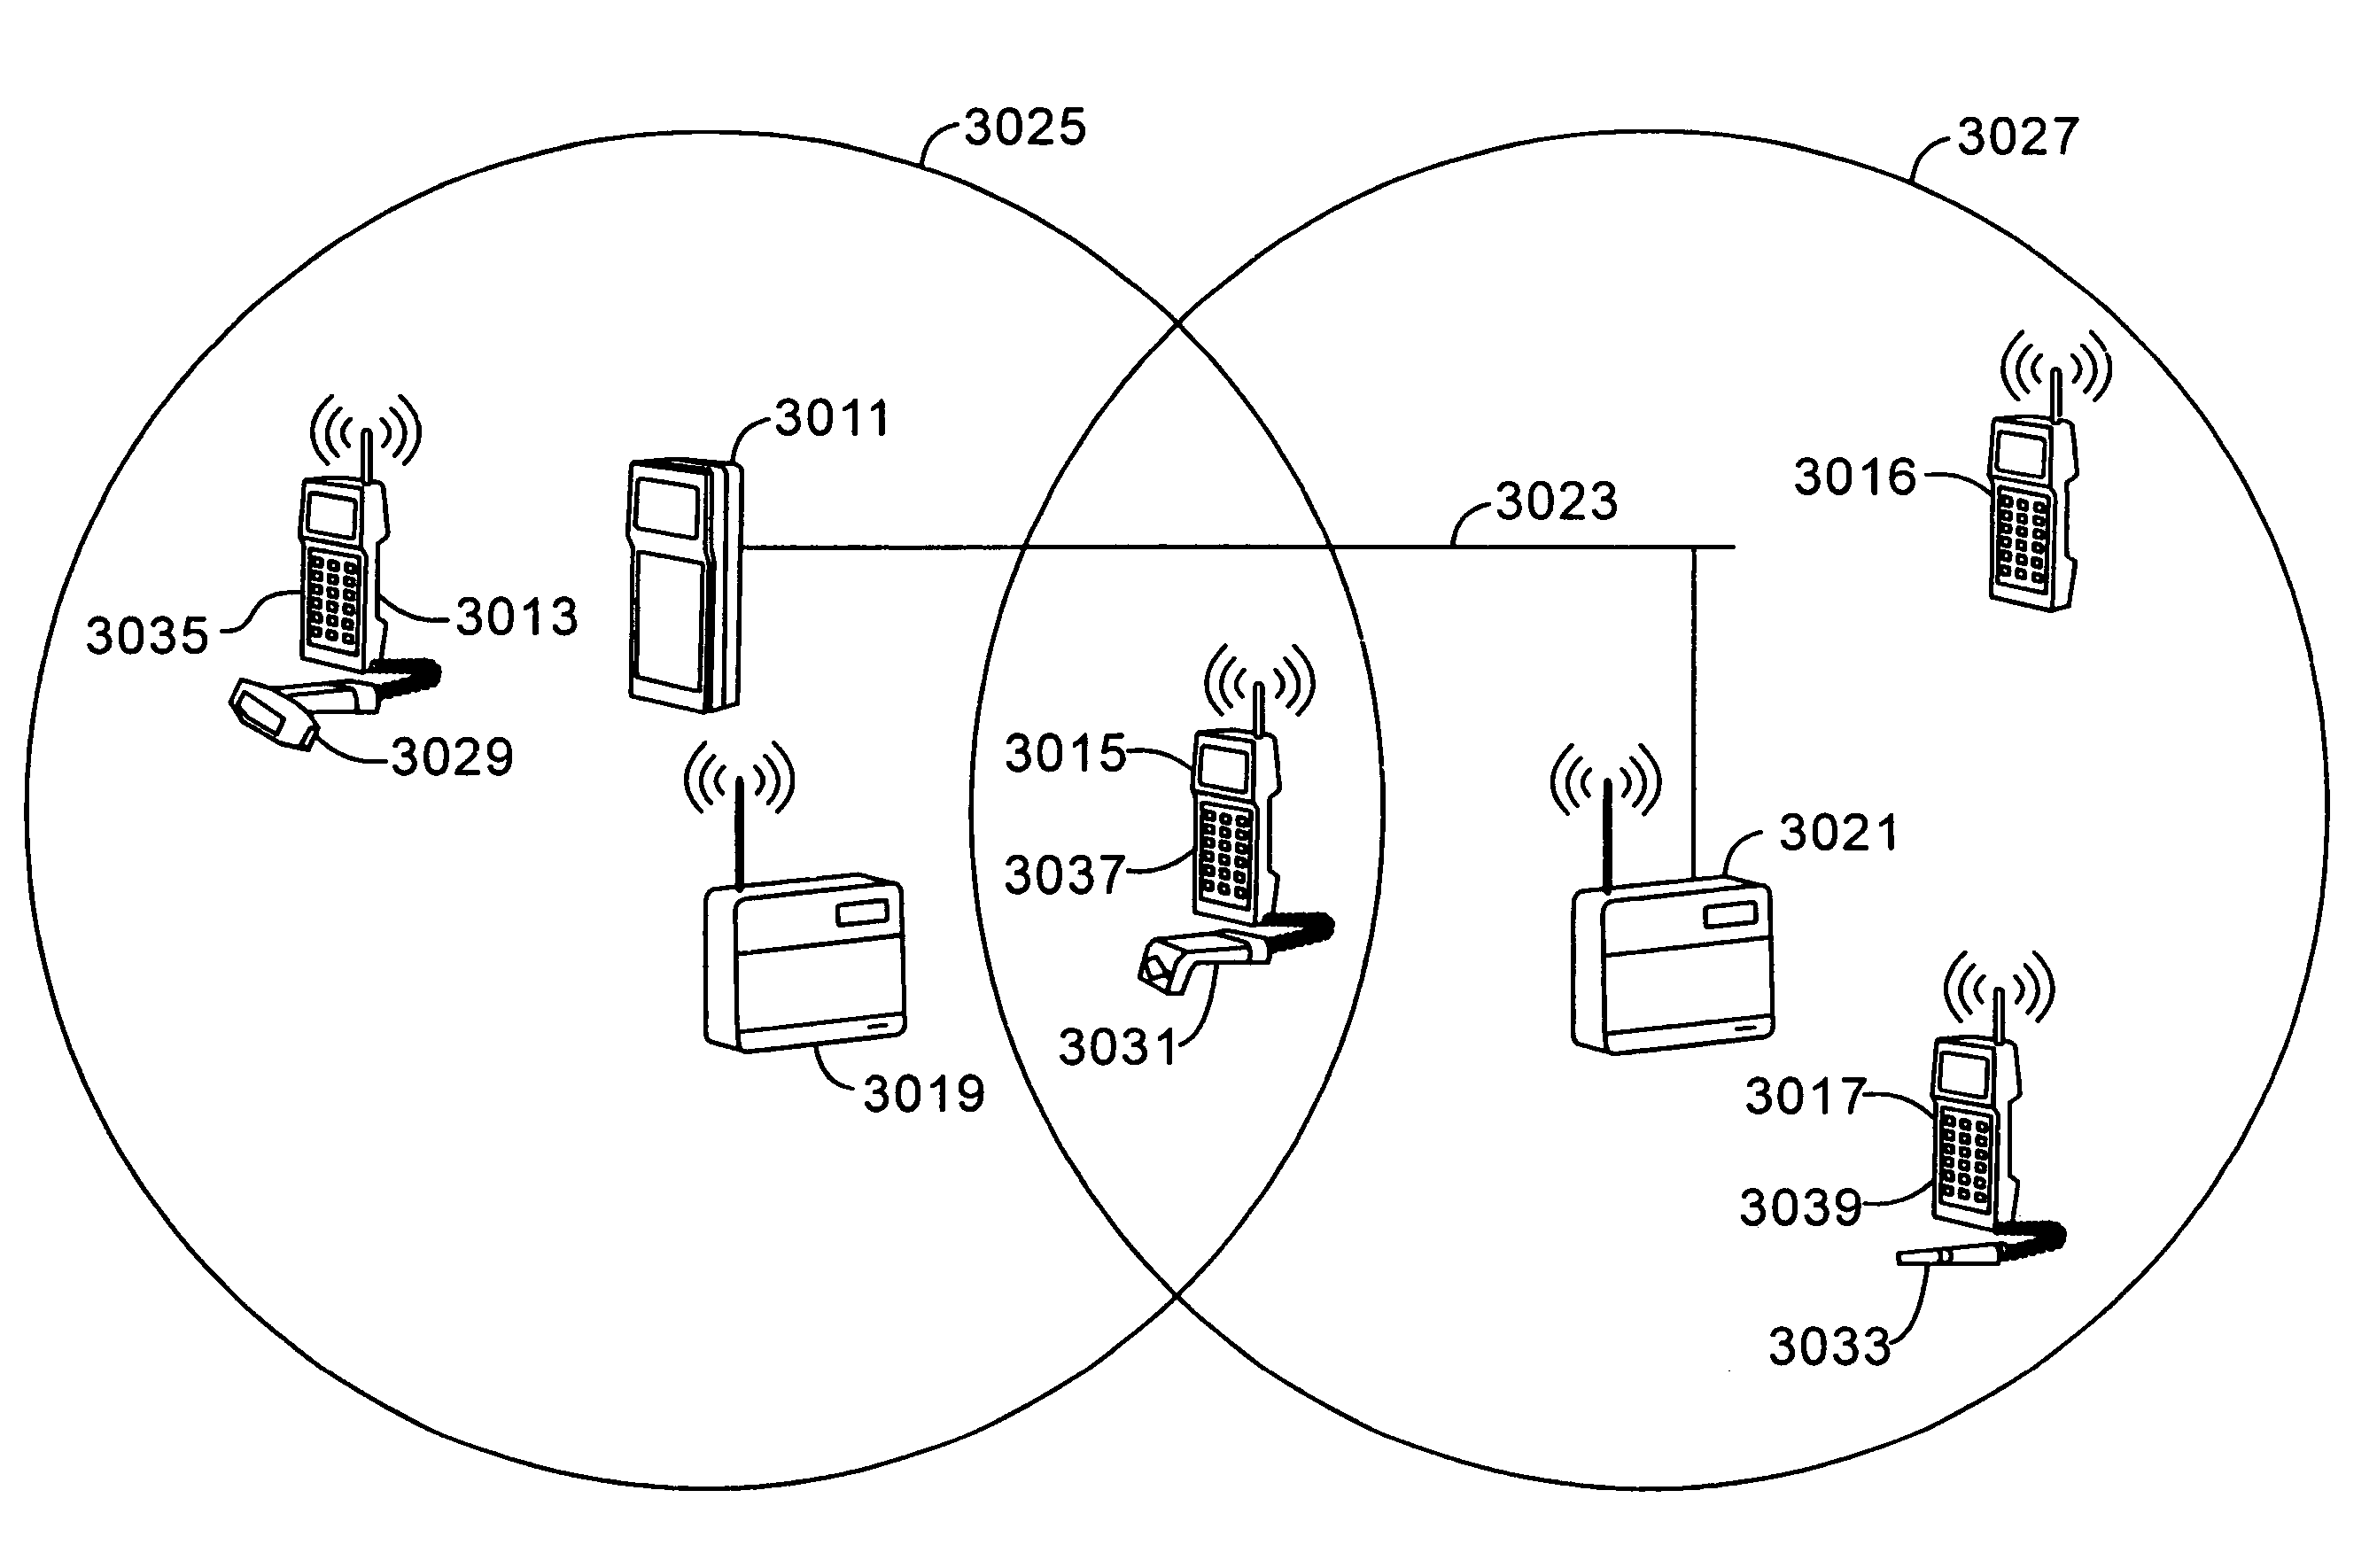 Network supporting roaming, sleeping terminals